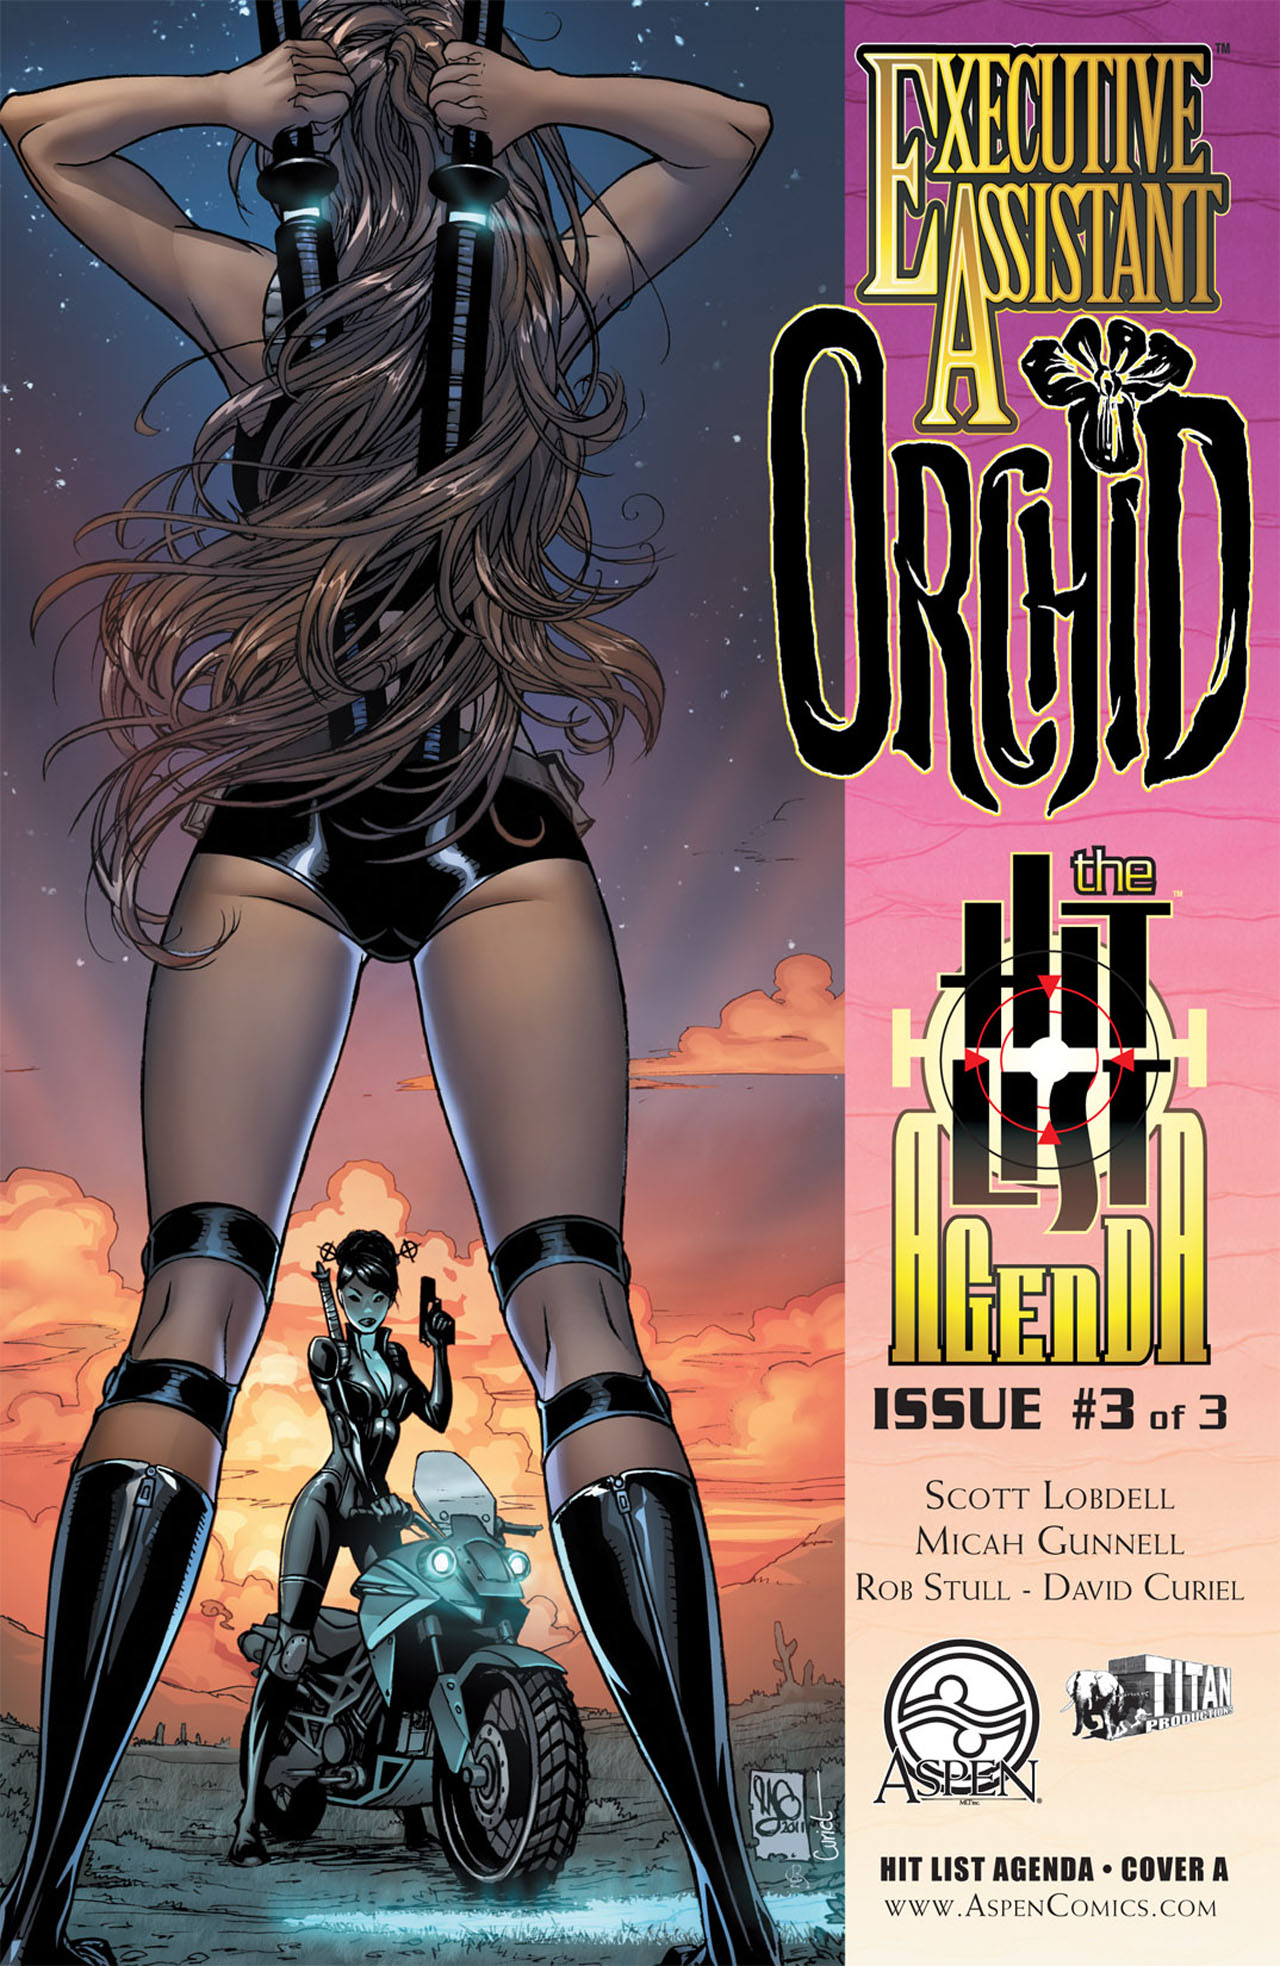 Read online Executive Assistant: Orchid comic -  Issue #3 - 1